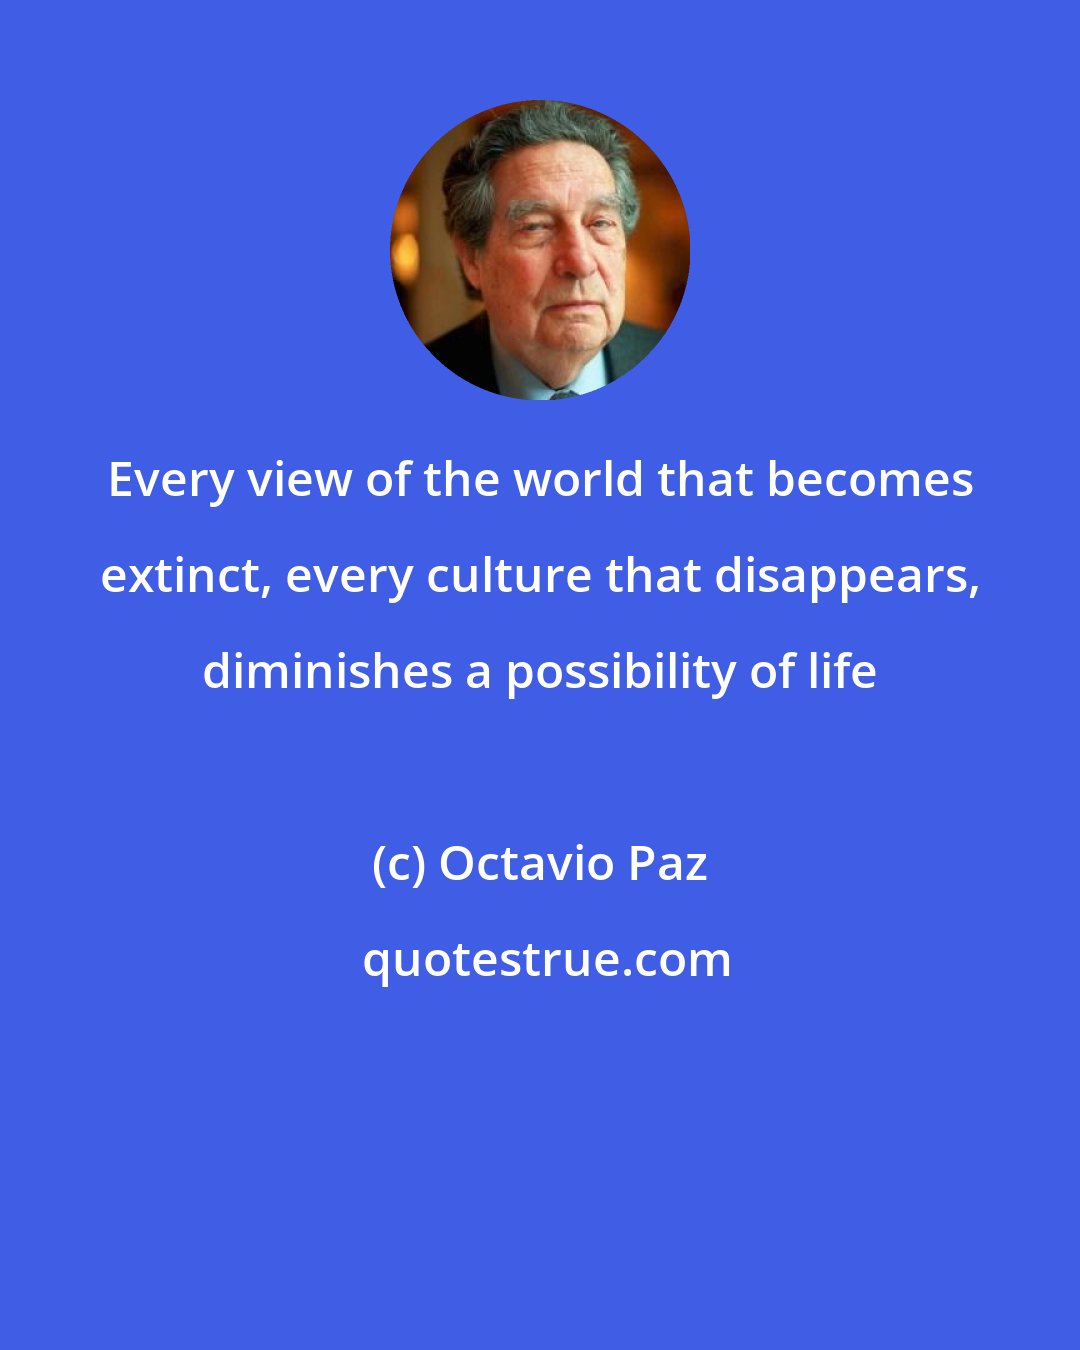 Octavio Paz: Every view of the world that becomes extinct, every culture that disappears, diminishes a possibility of life